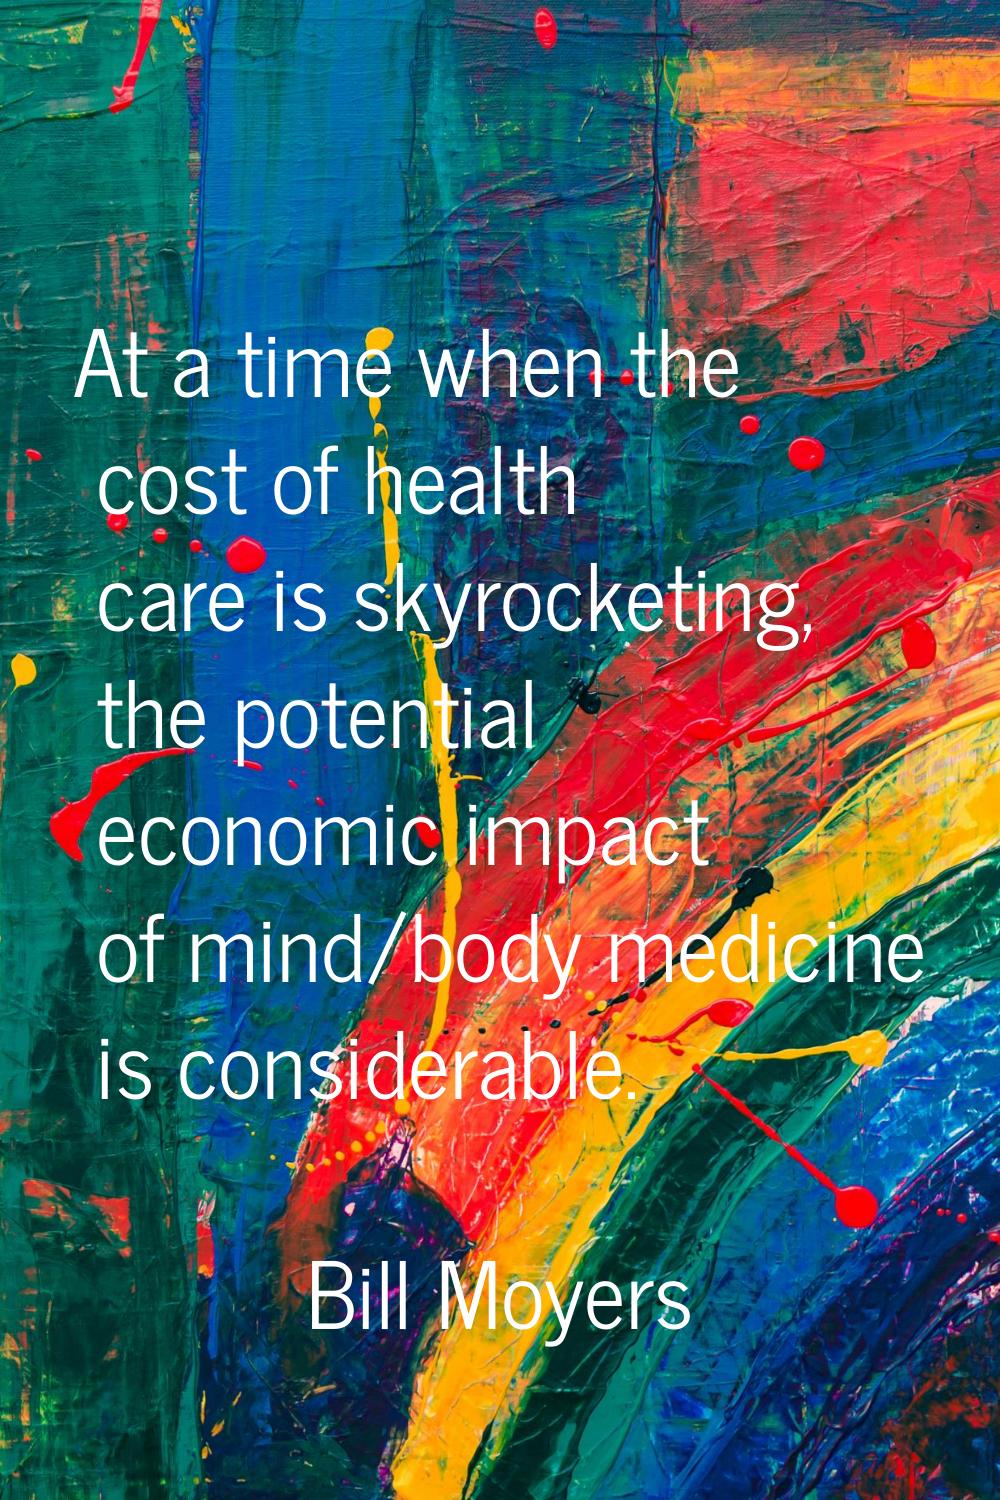 At a time when the cost of health care is skyrocketing, the potential economic impact of mind/body 